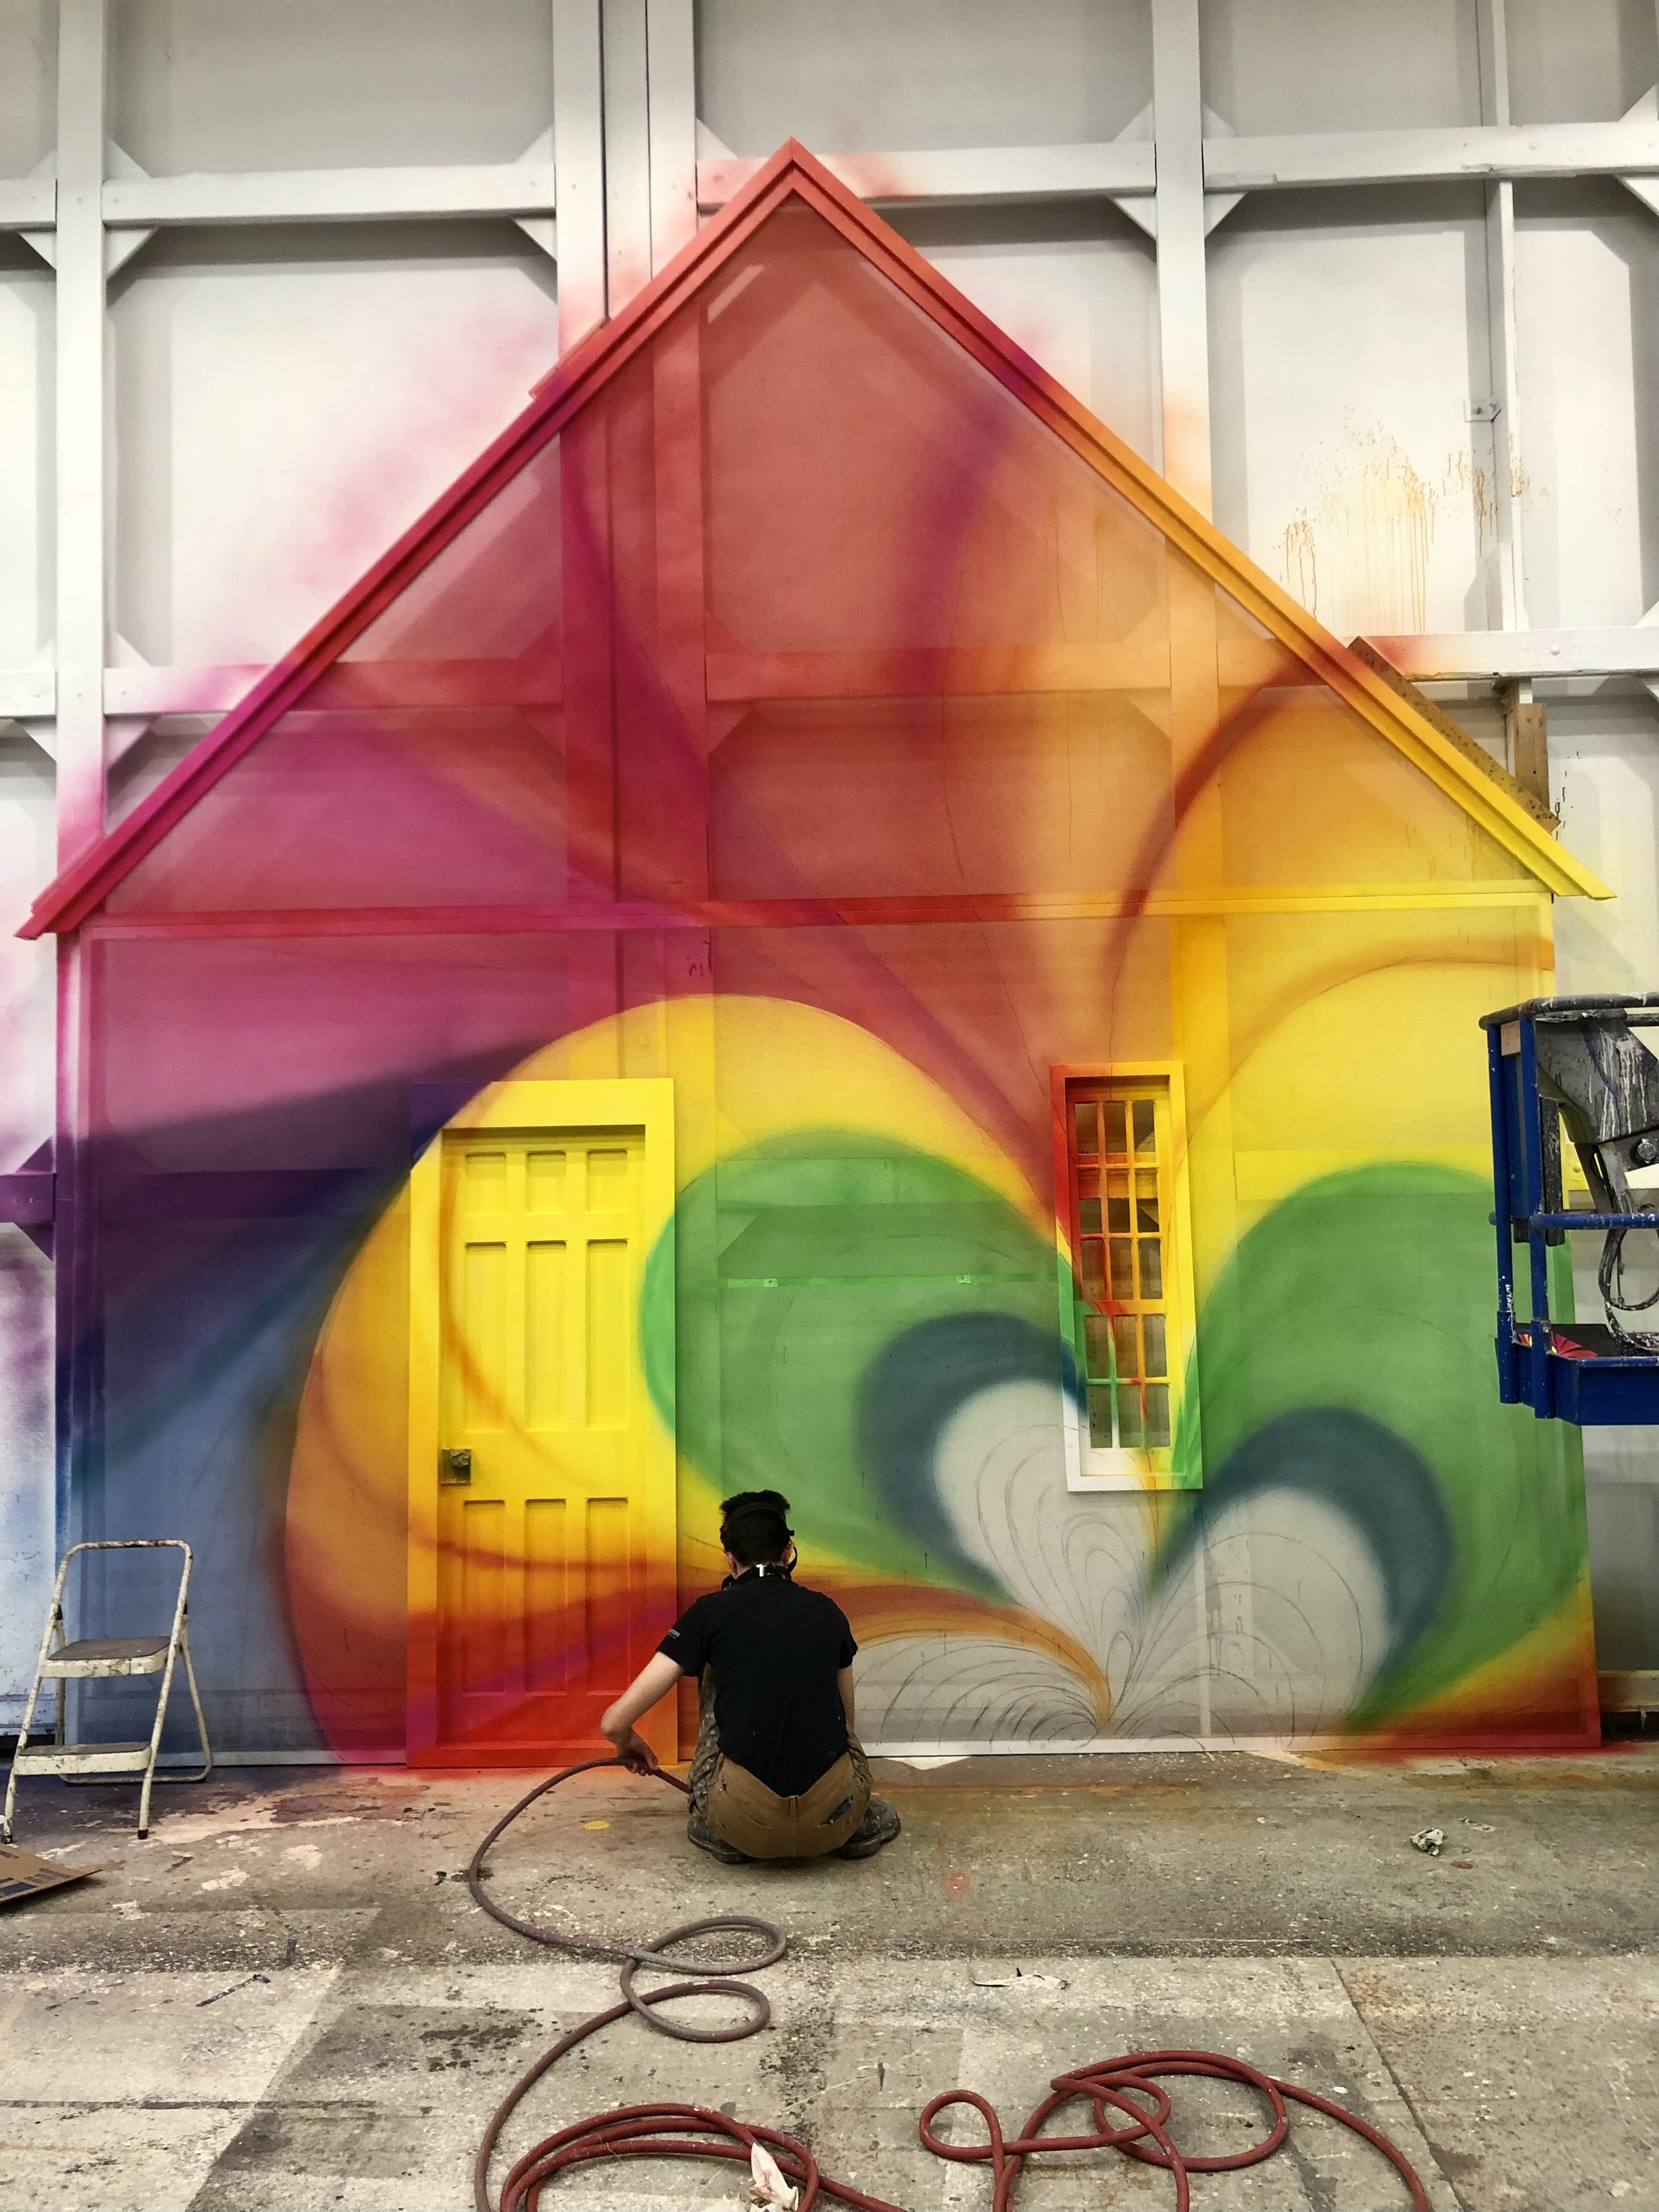 Airbrushed Rainbow House for Matilda, South Coast Repertory